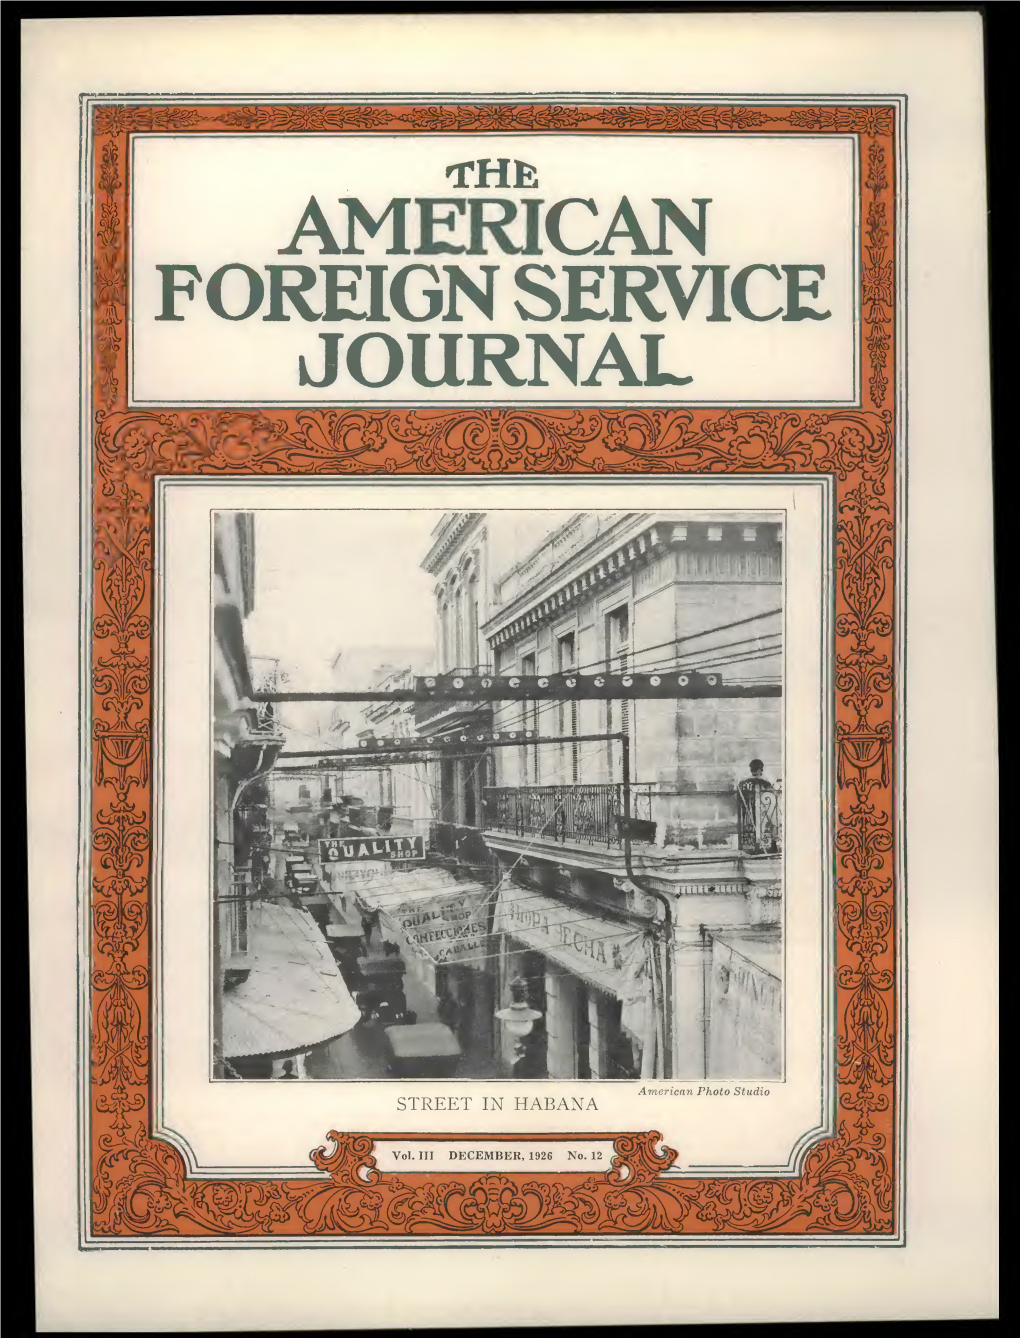 The Foreign Service Journal, December 1926